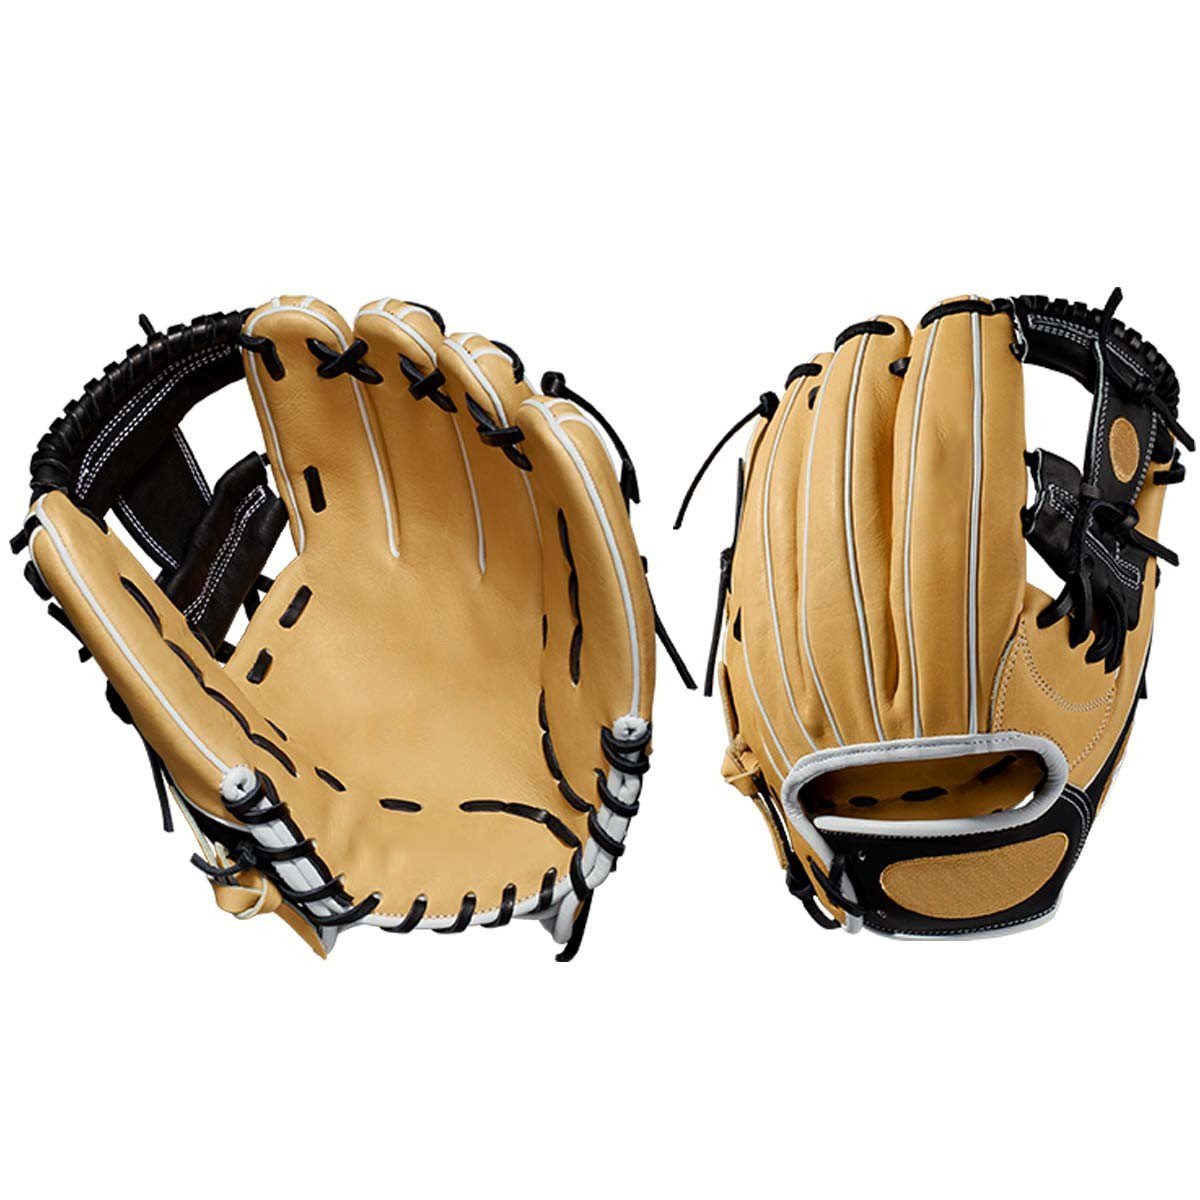 Infield full leather durable camel color 11.75" baseball gloves